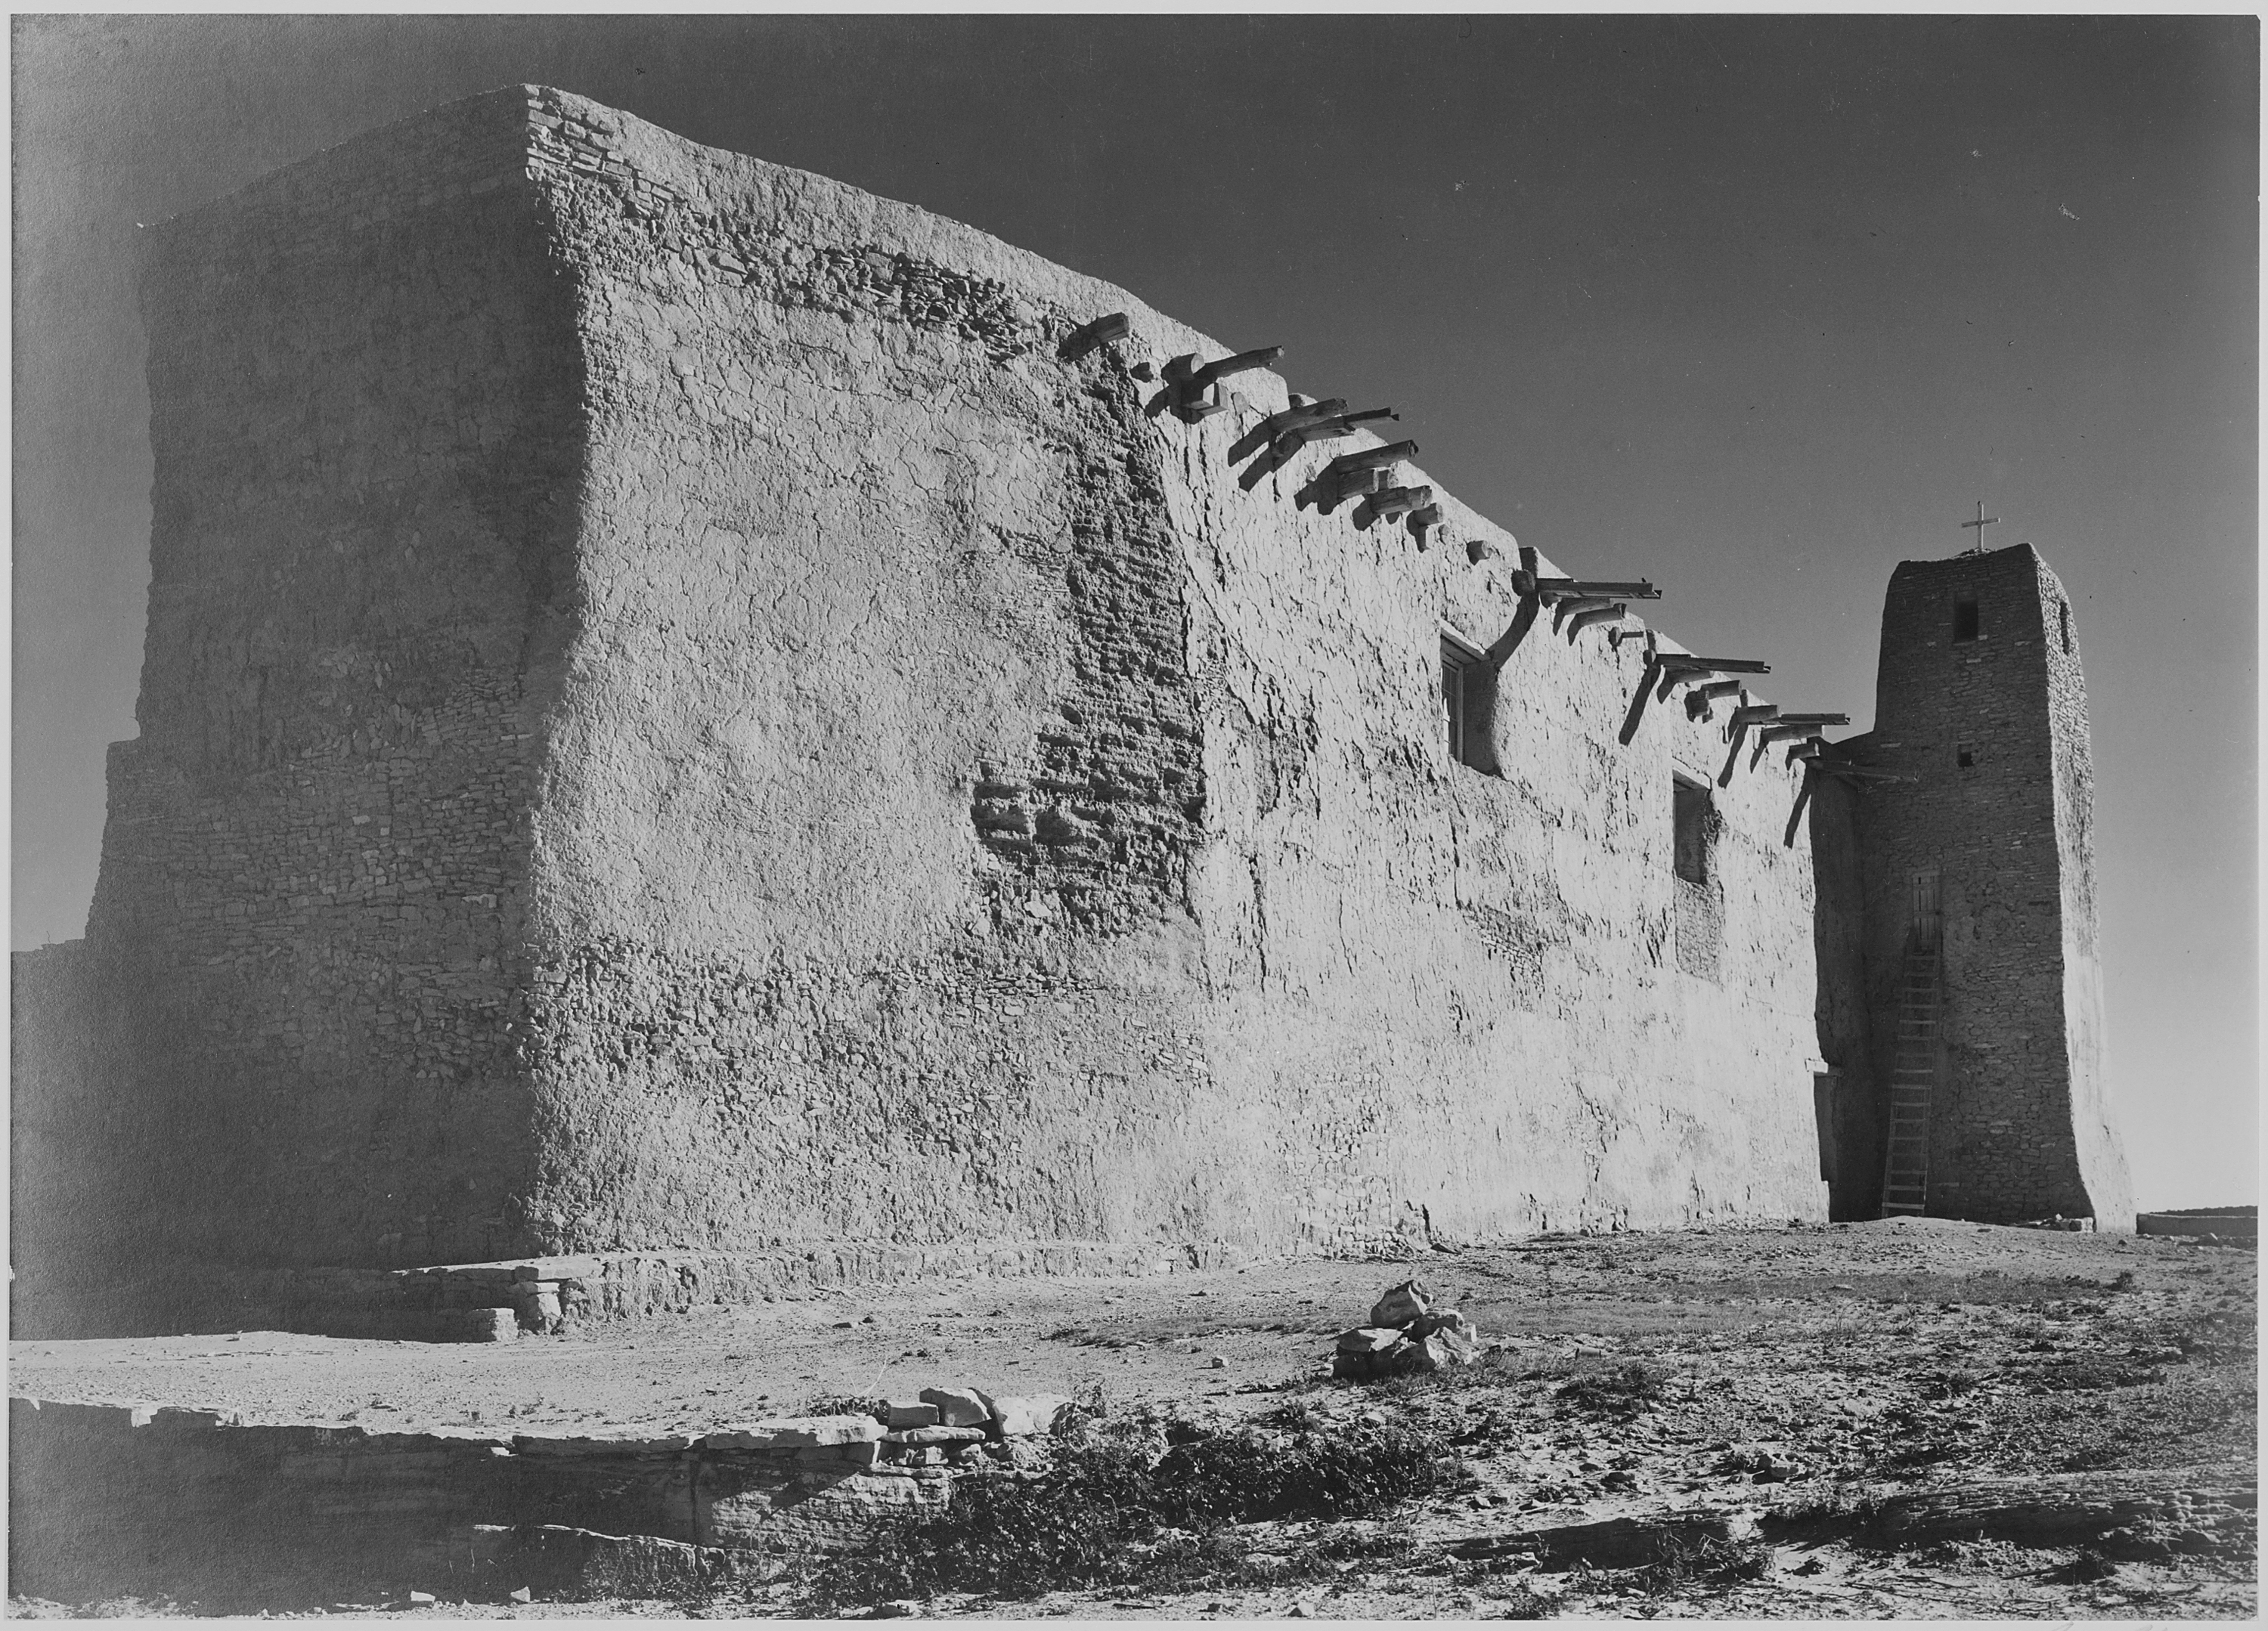 Ansel Adams - National Archives 79-AA-A05